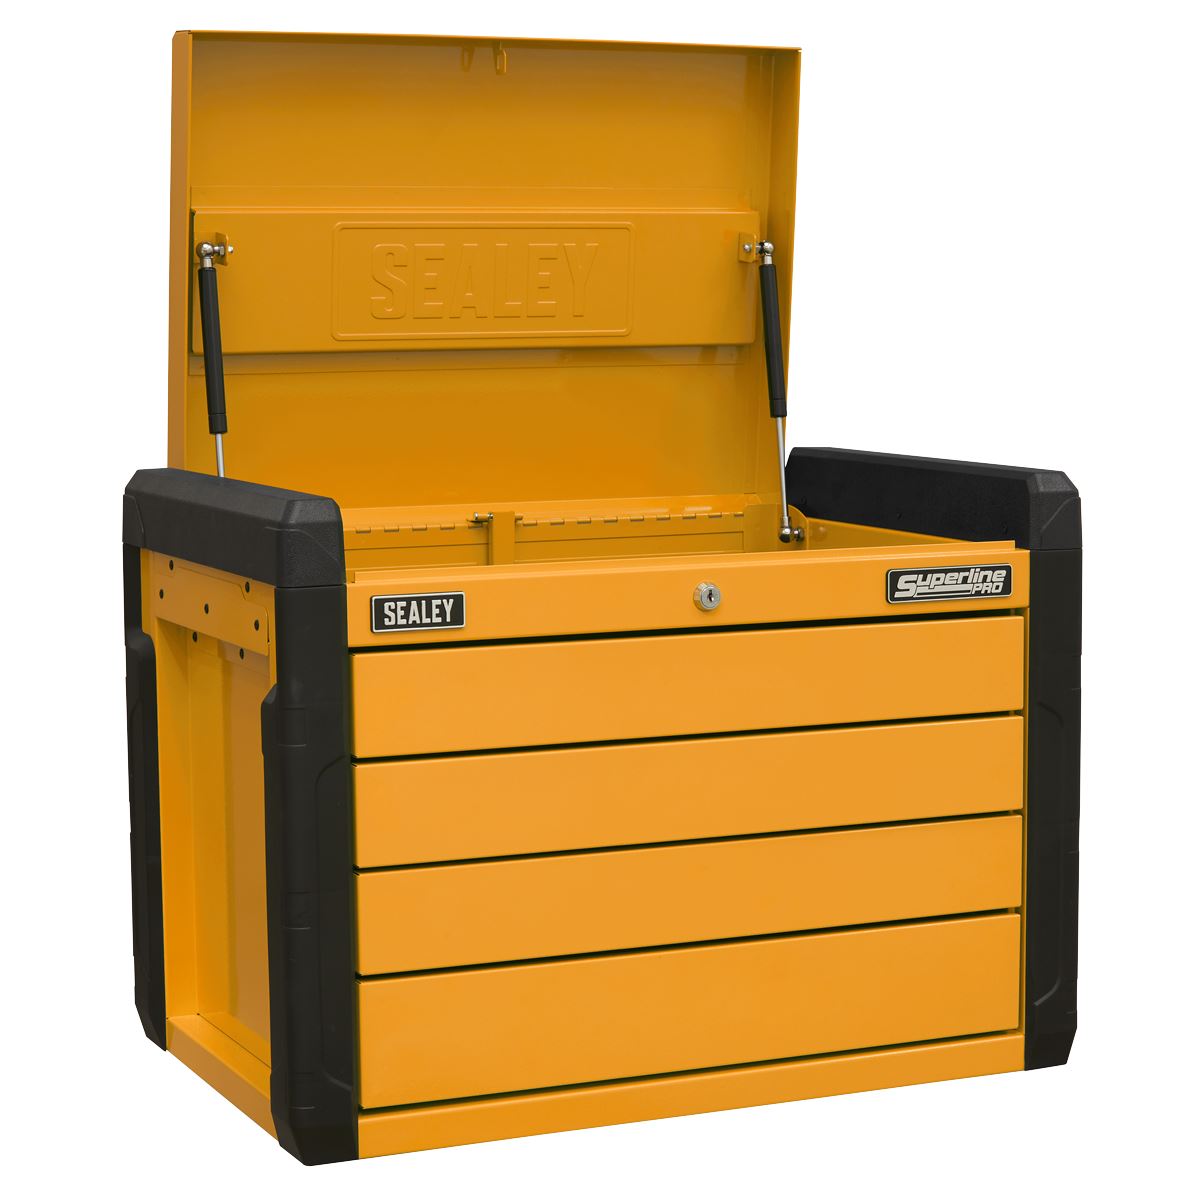 Sealey Superline Pro 4-Drawer Push-to-Open Topchest with Ball-Bearing Slides - Orange